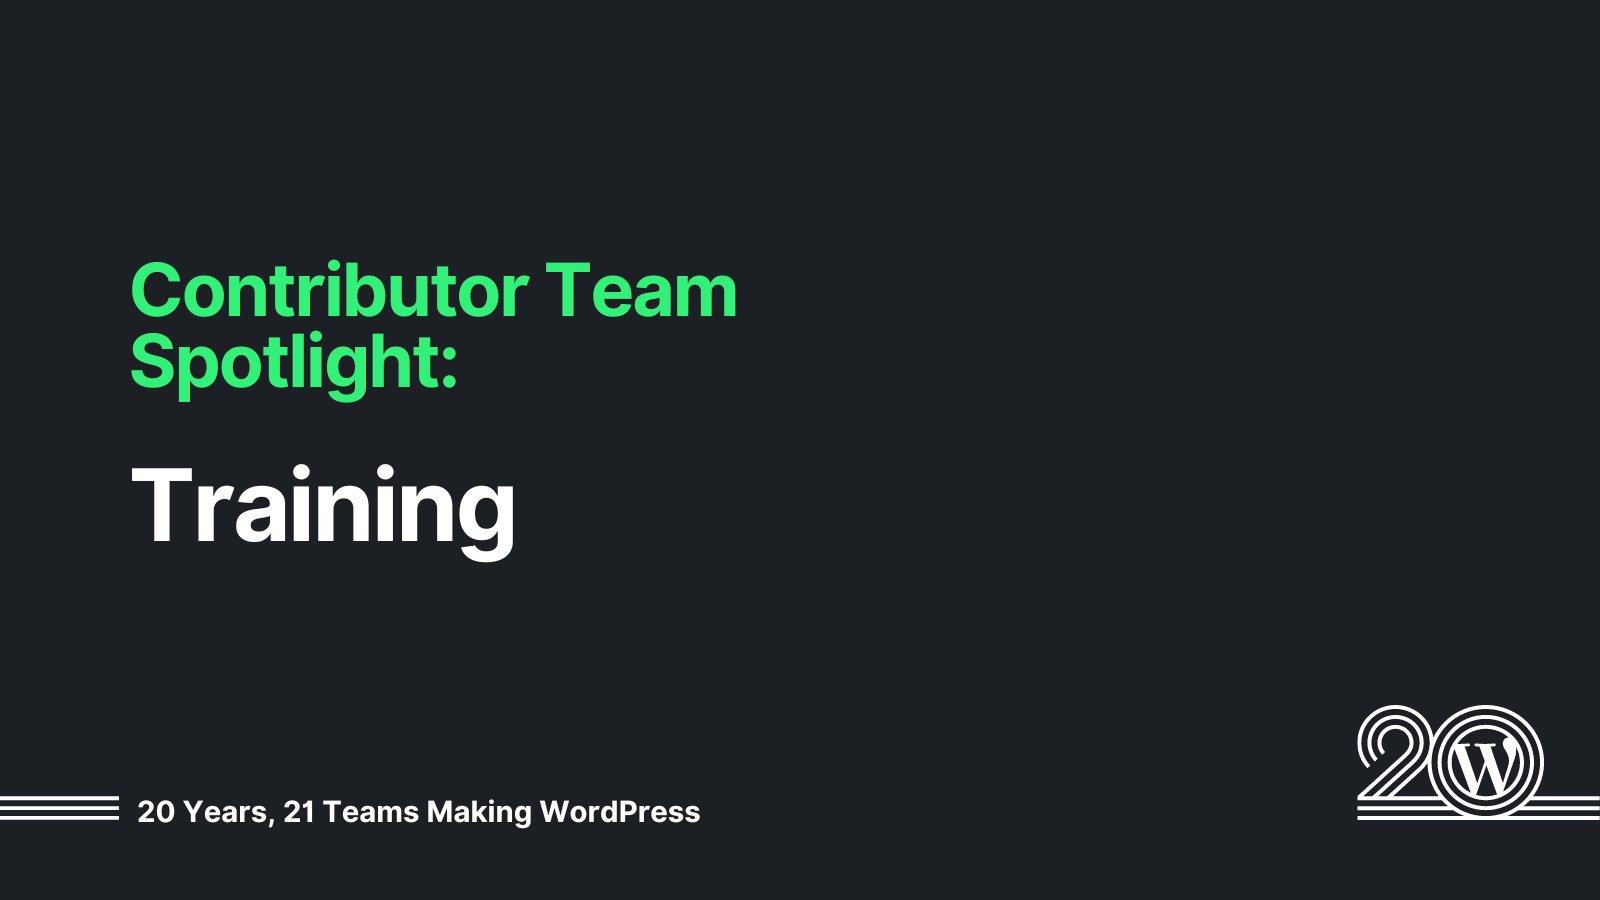 Black background with green and white text that says: Contributor Team Spotlight: Training. 20 Years, 21 Teams Making WordPress. 